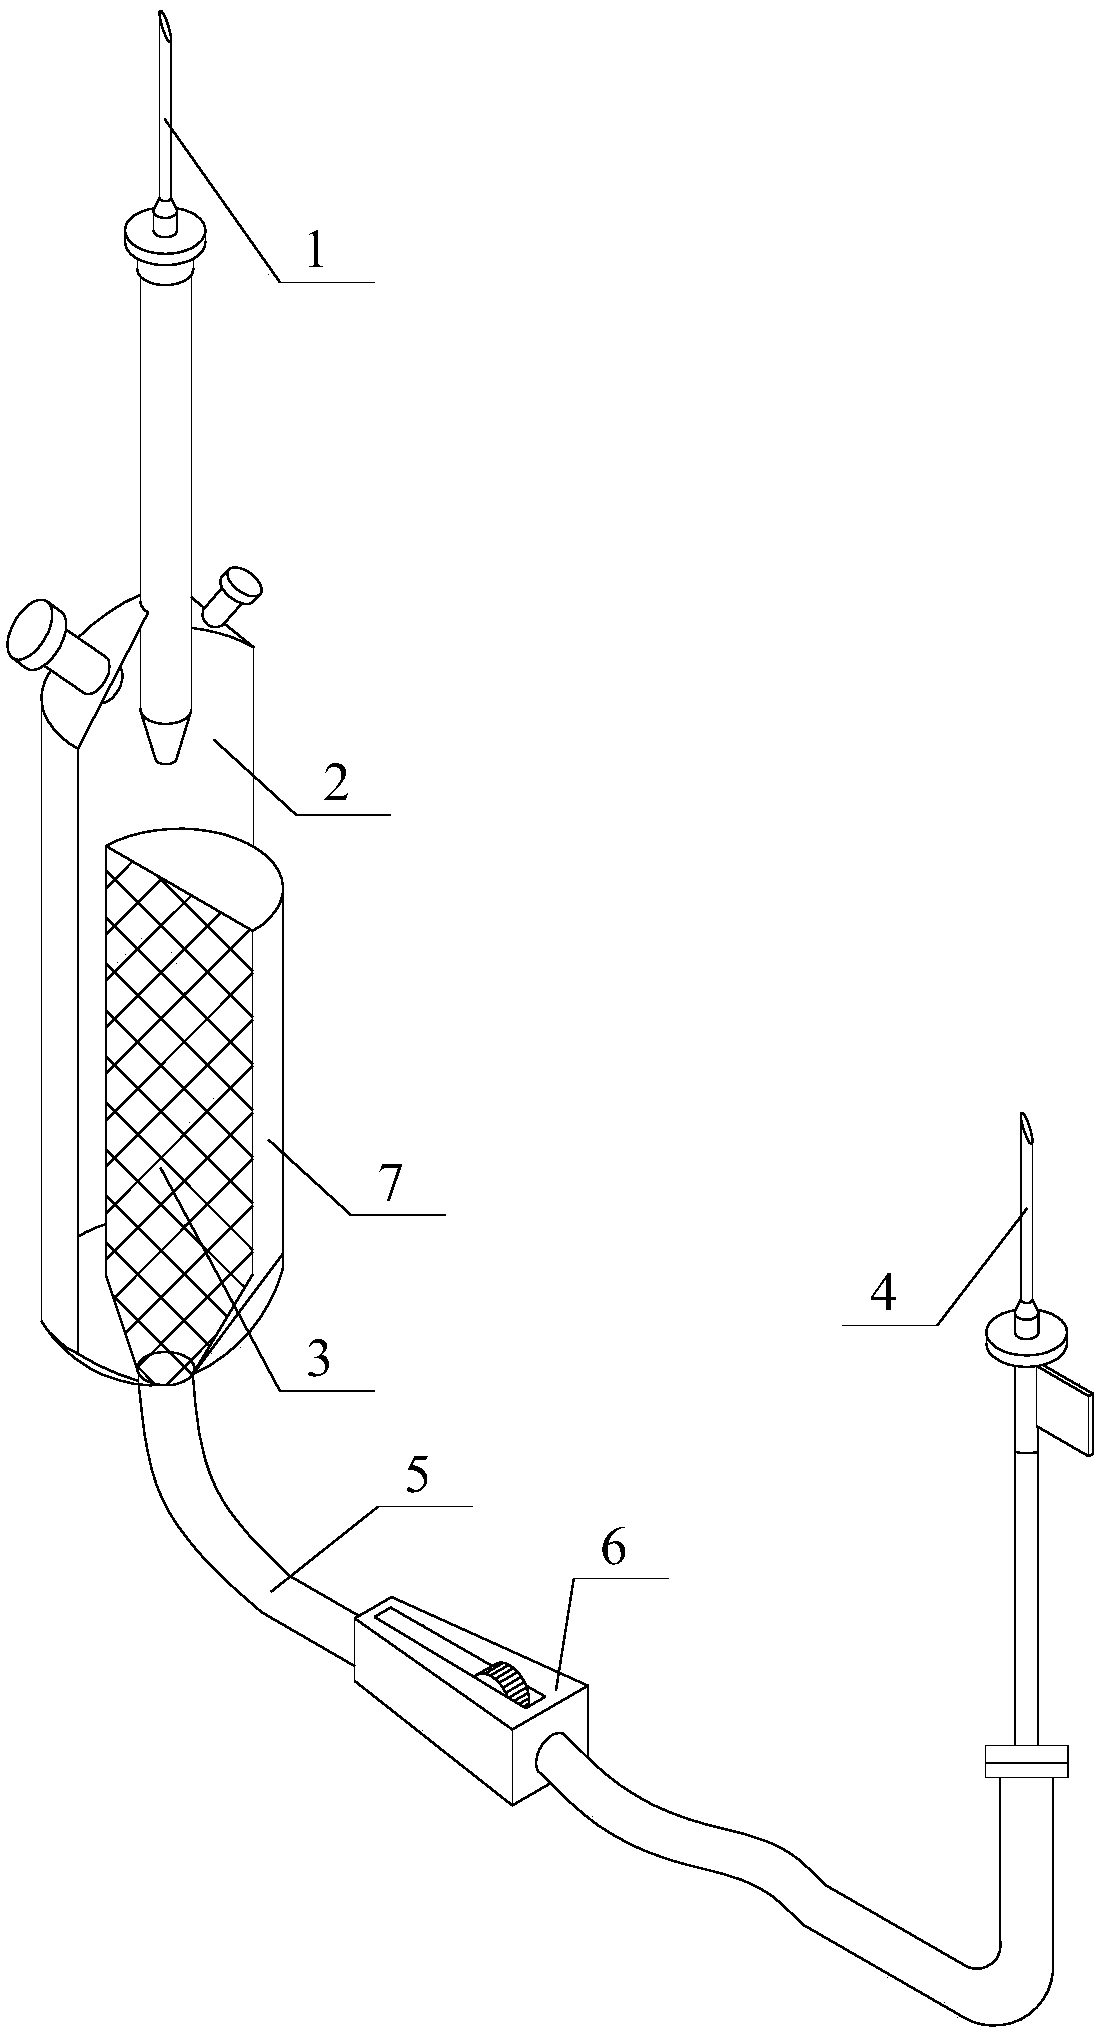 Safe infusion apparatus capable of randomly placing normal infusion